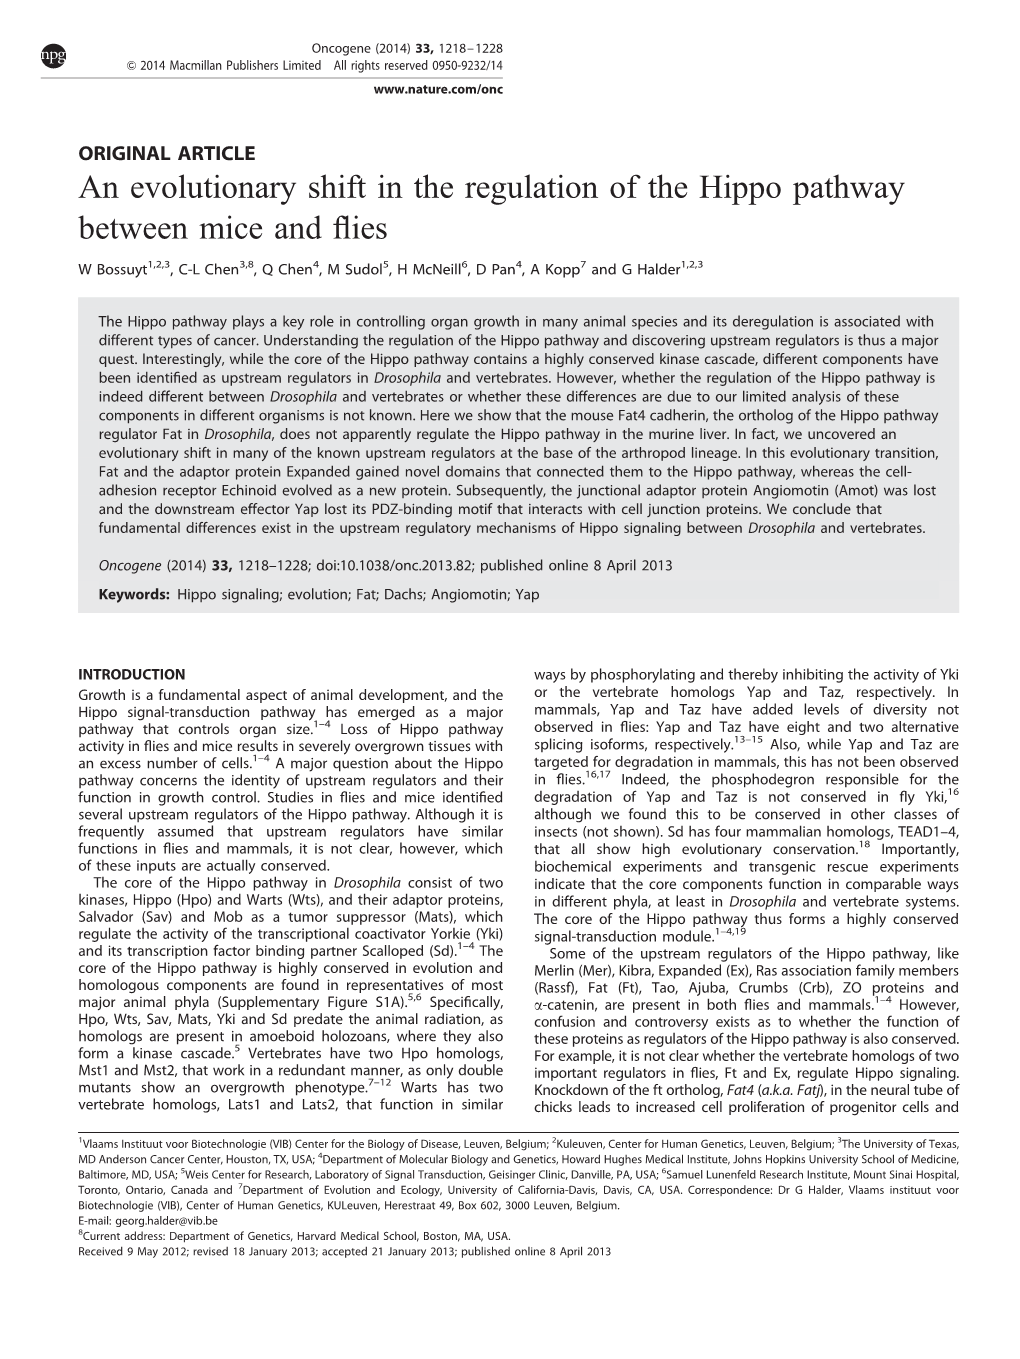 An Evolutionary Shift in the Regulation of the Hippo Pathway Between Mice and ﬂies